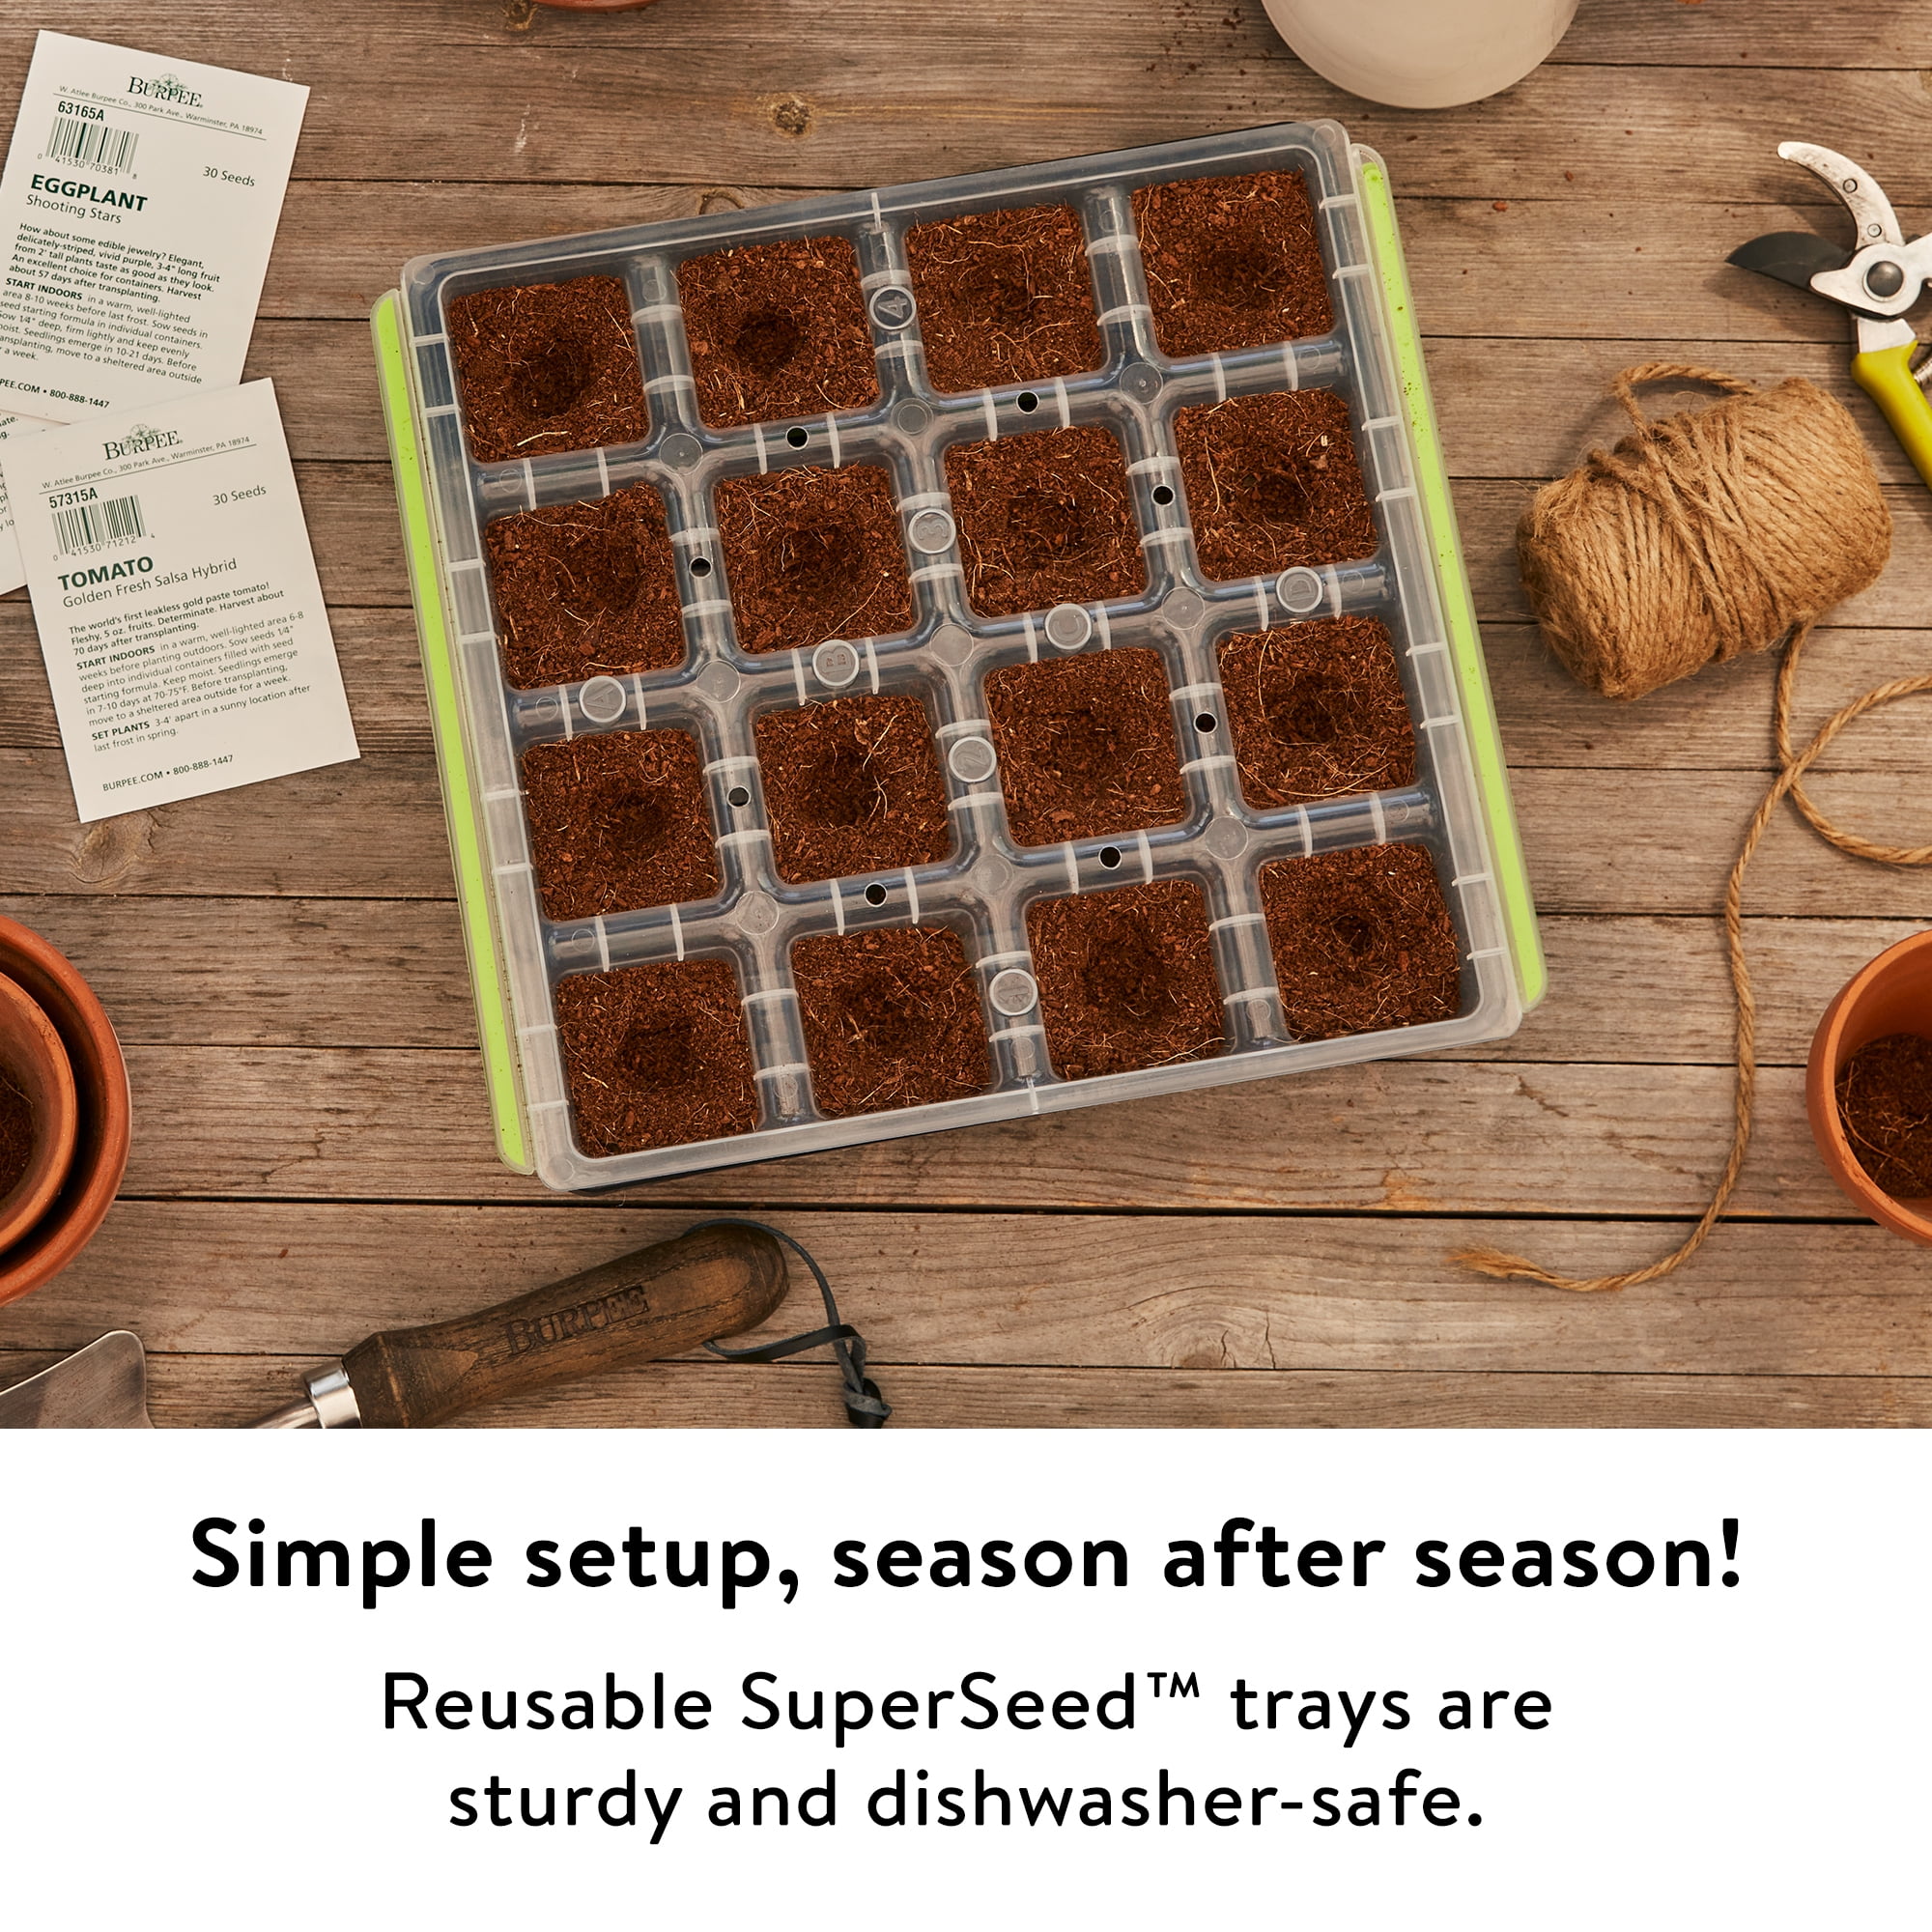 SuperSeed Seed Starting Tray, 8 XL Cell - Burpee